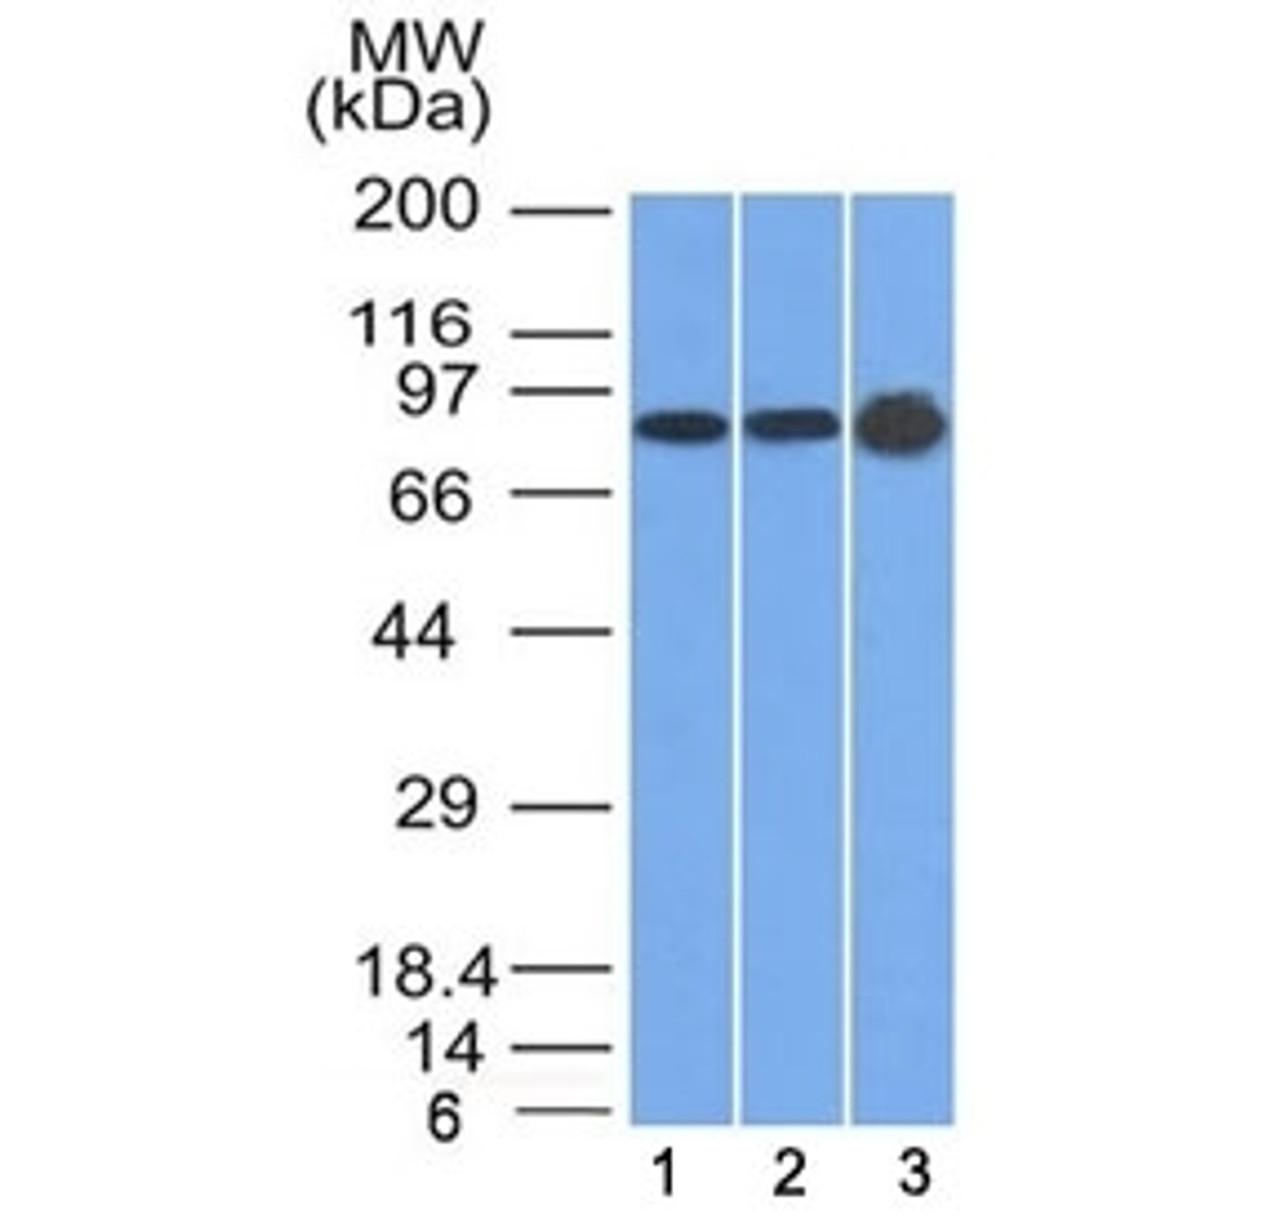 Western blot testing of human 1) U87, 2) HeLa and 3) A431 cell lysate with Plakophilin 1 antibody (clone 10B2) . Expected molecular weight: 75-83 kDa.